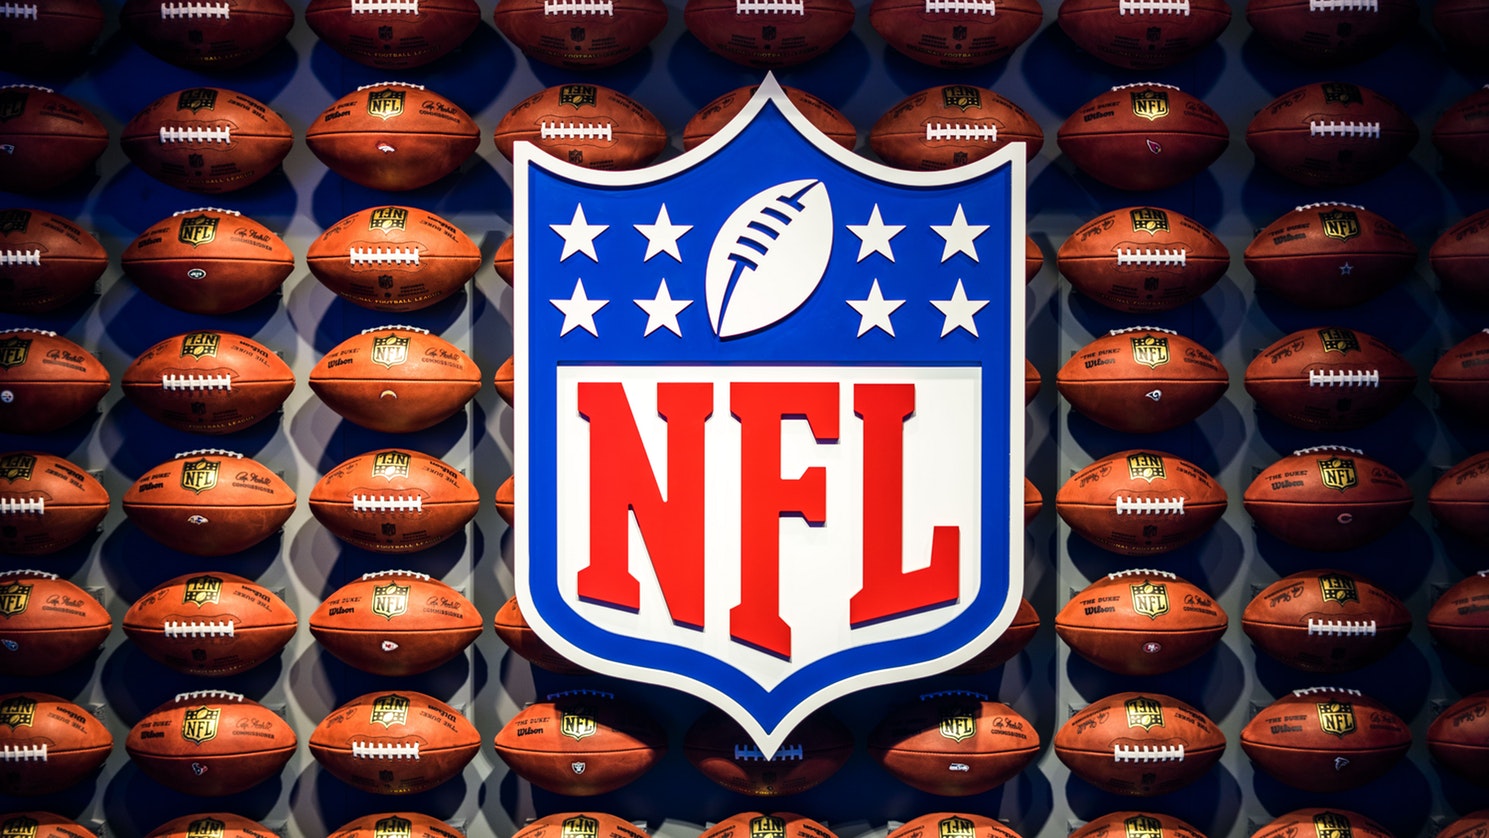 NFL Ratings Are up, but Does that Mean All is Forgiven?